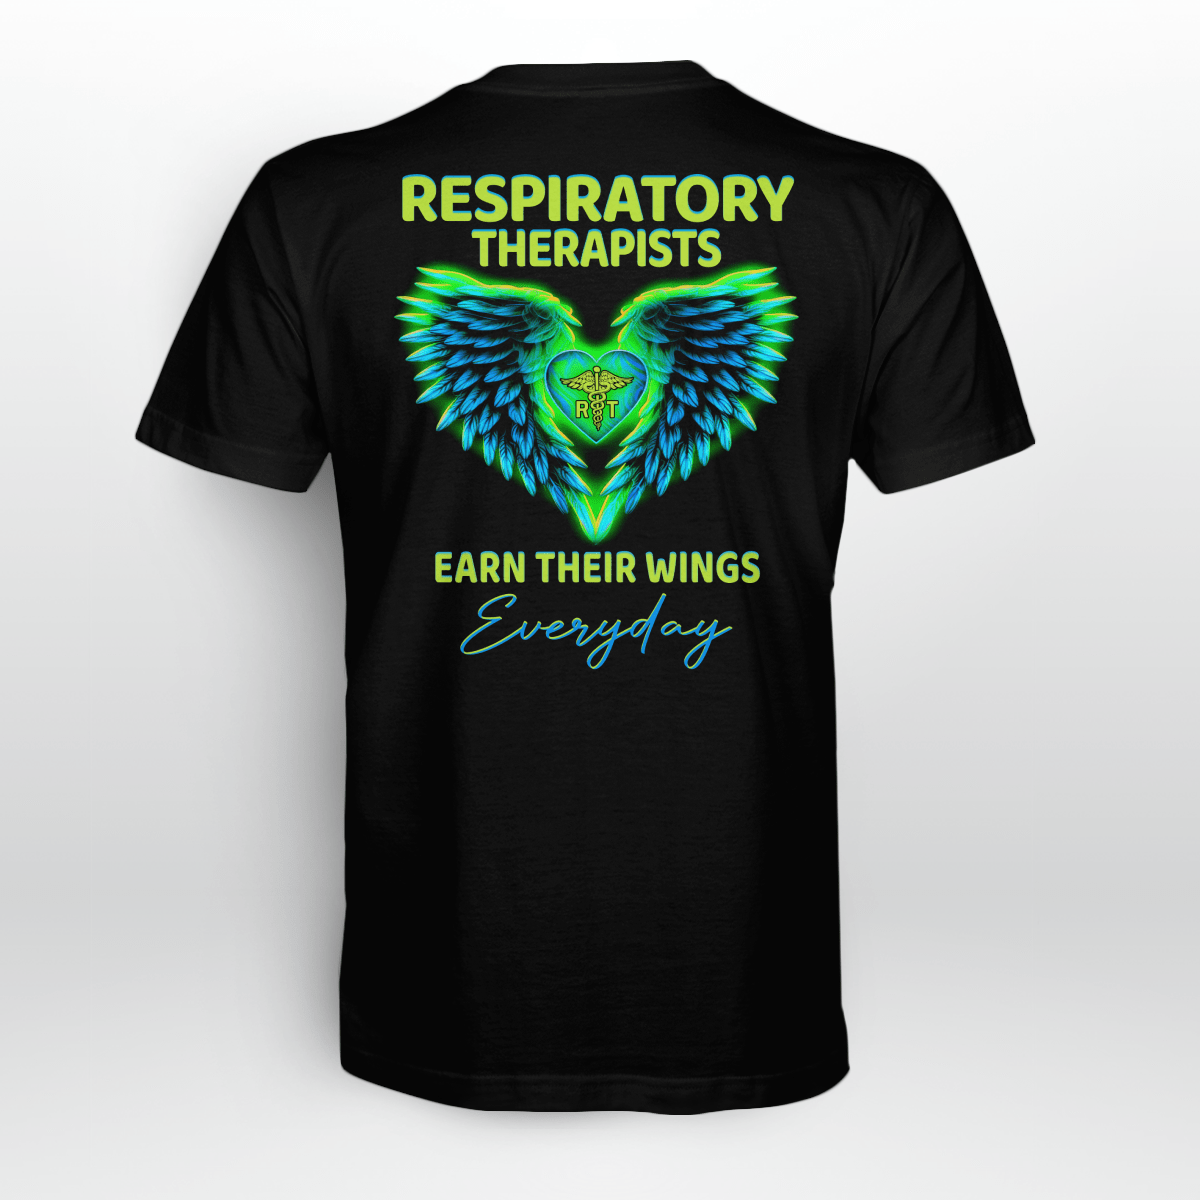 Respiratory Therapist Earn Their Wings Everyday-T-Shirt -#F260523EARTH14BRETHZ2